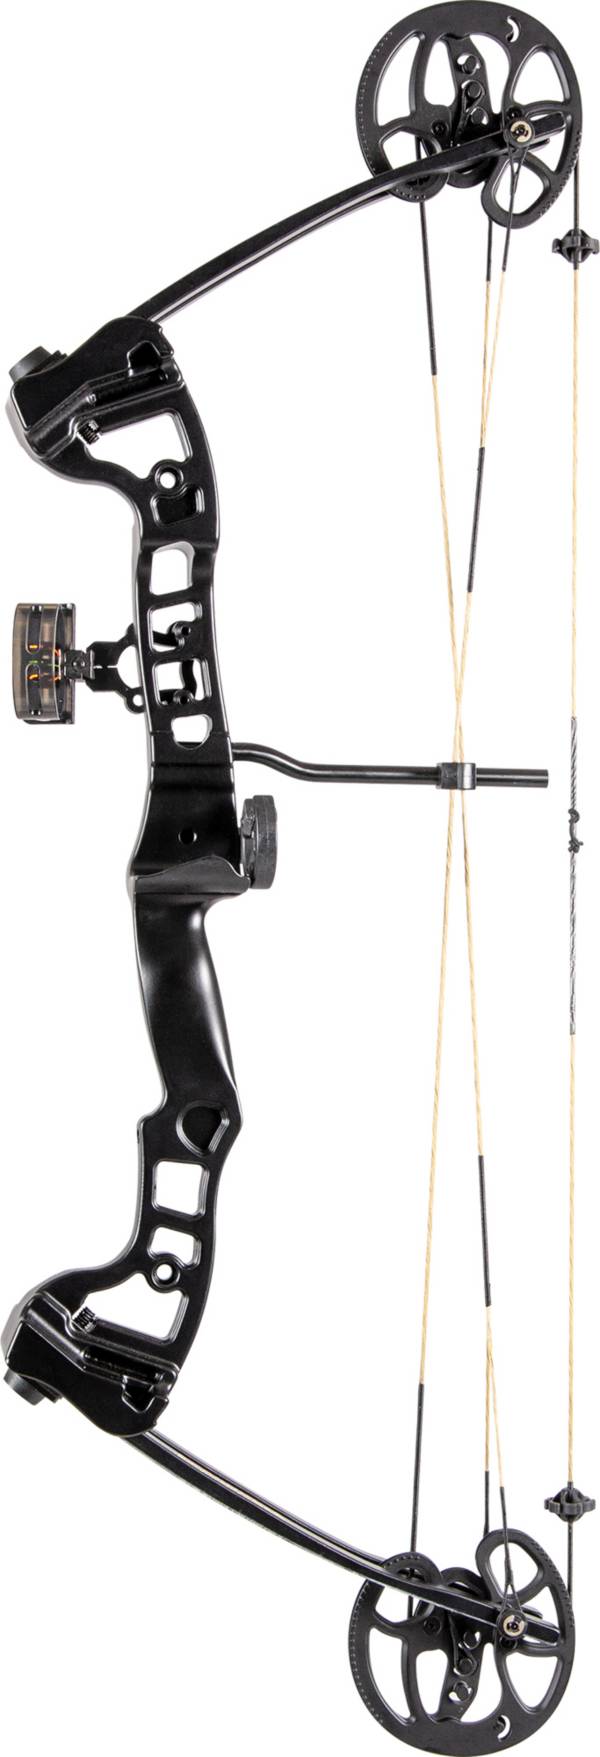 LOADED #### Vortex Compound Bow by BARNETT 45lbs.REDUCED Cost 